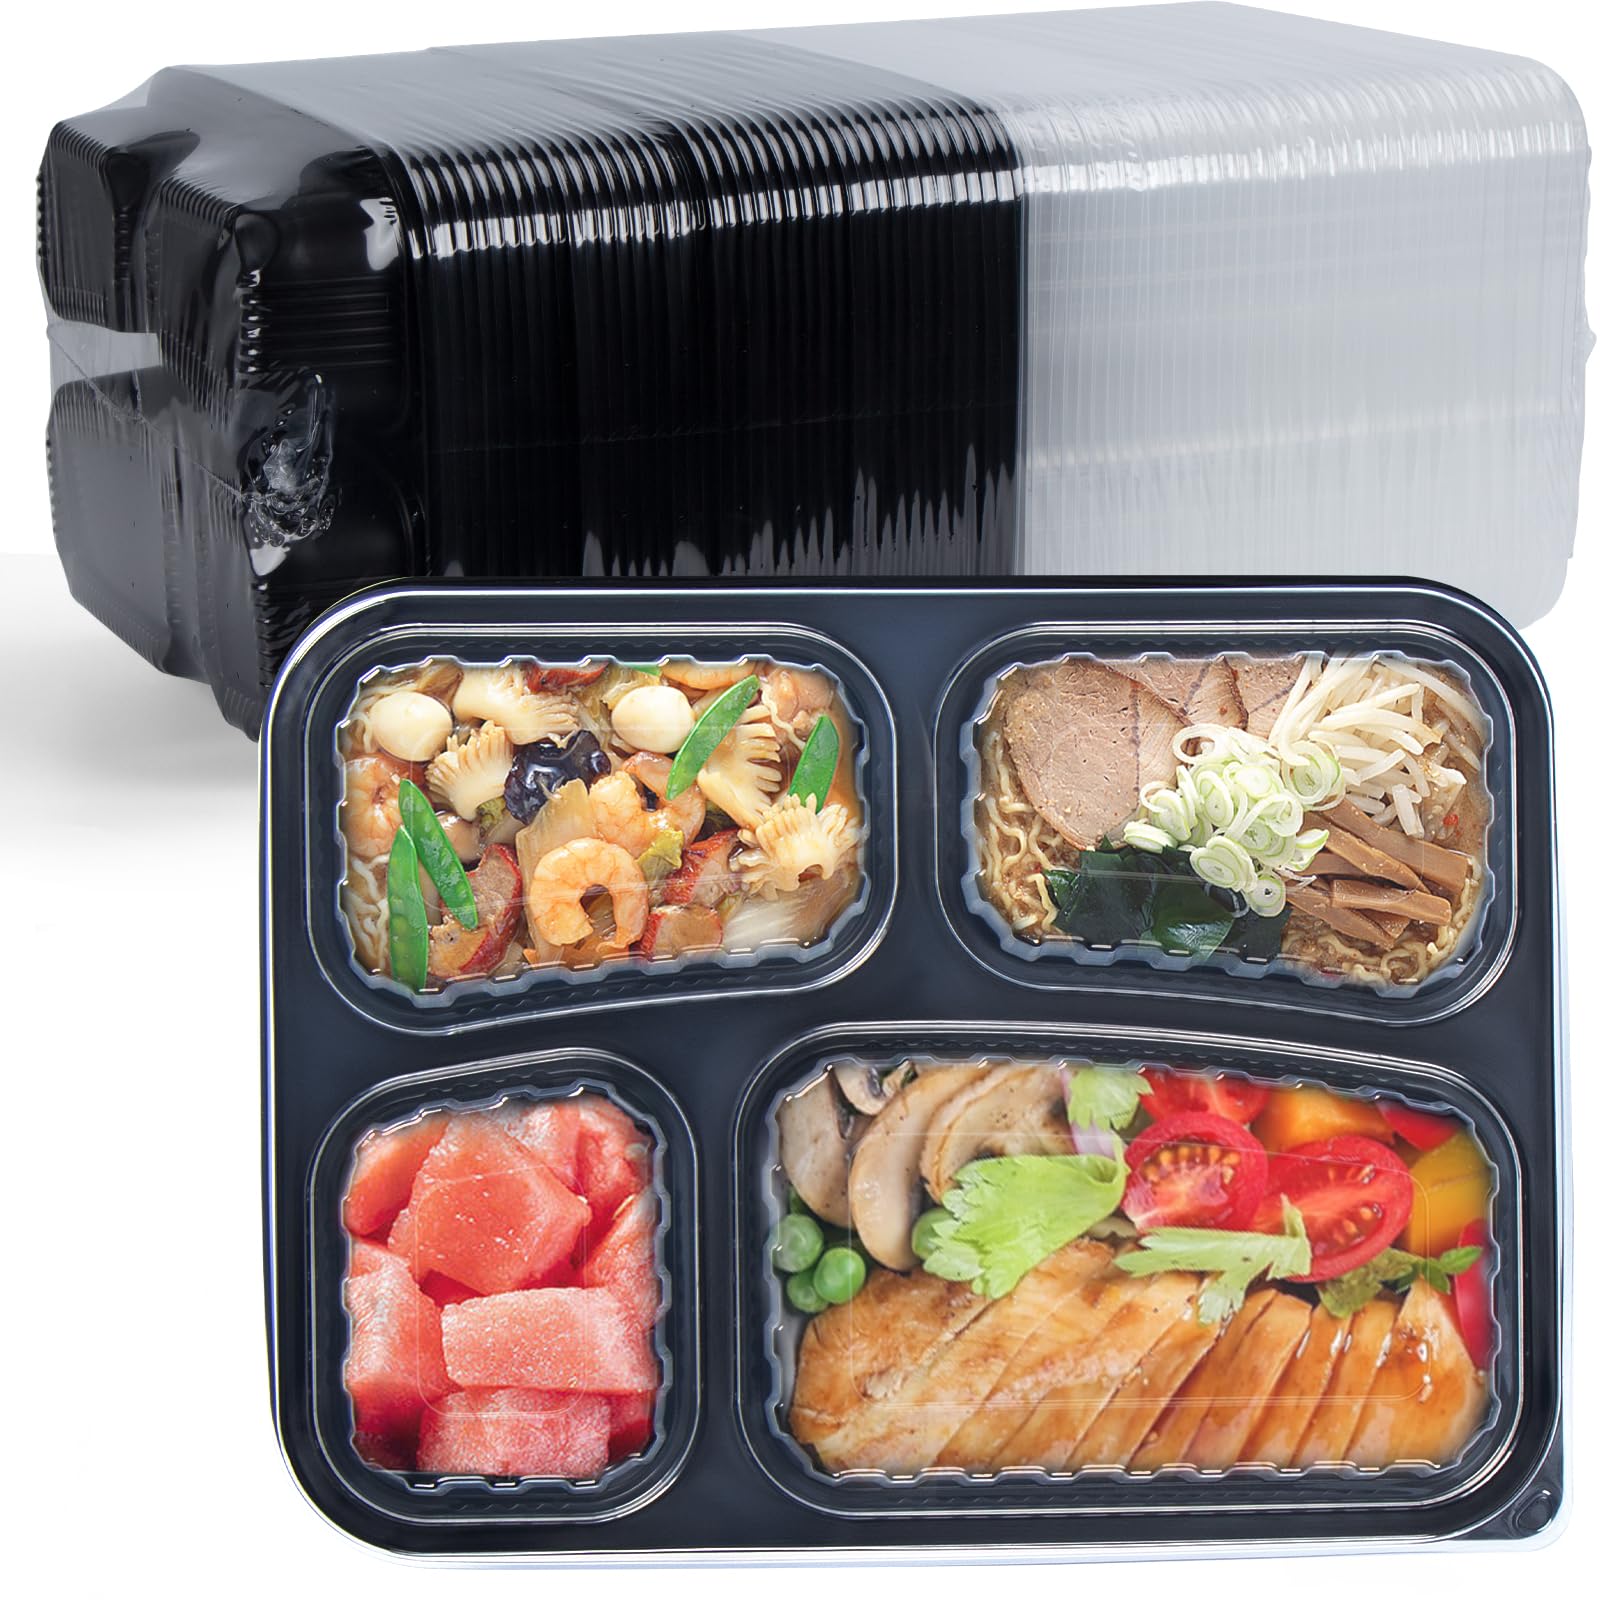 EKOSAVOR Meal Prep Container, 4 Compartment 40 Pack 34oz - Reusable Bento Boxes for Food Storage and Portion Control - To Go Containers for Meal Planning - BPA Free Microwave and Freezer Safe